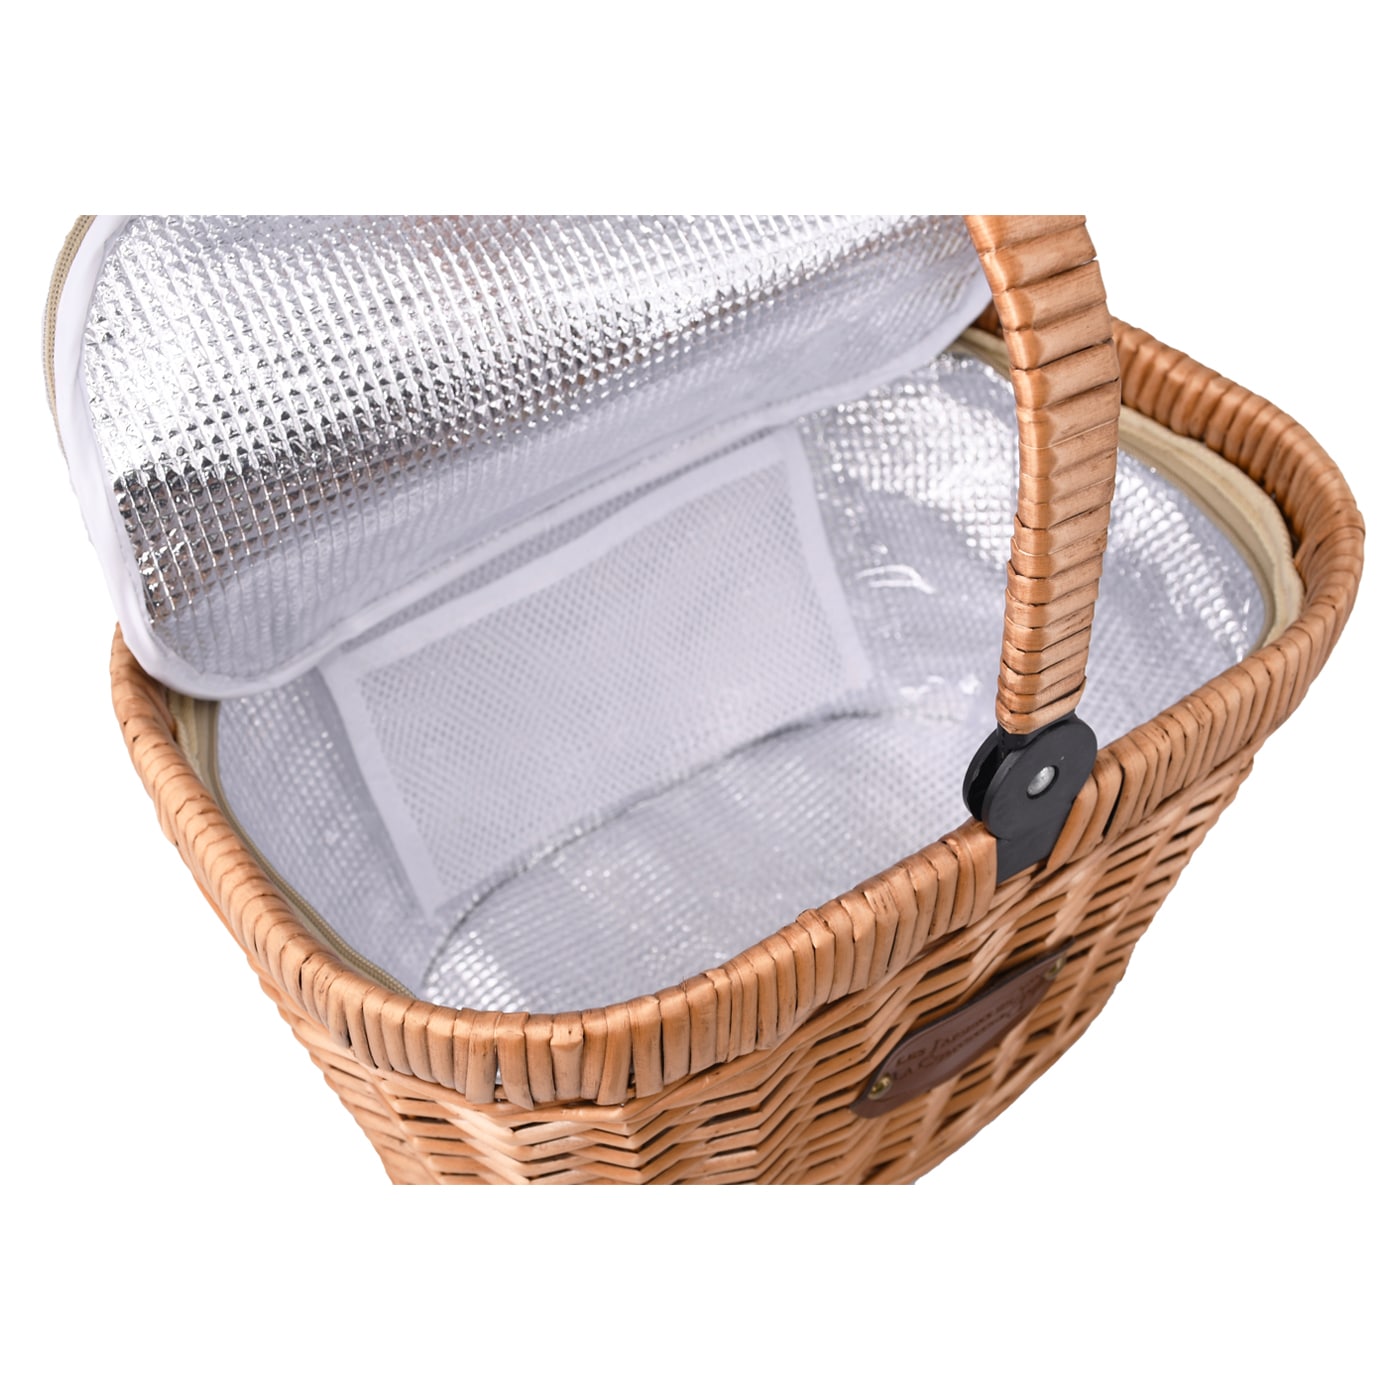 Bicycle Basket "Chantilly" - Blue - For picnics or shopping